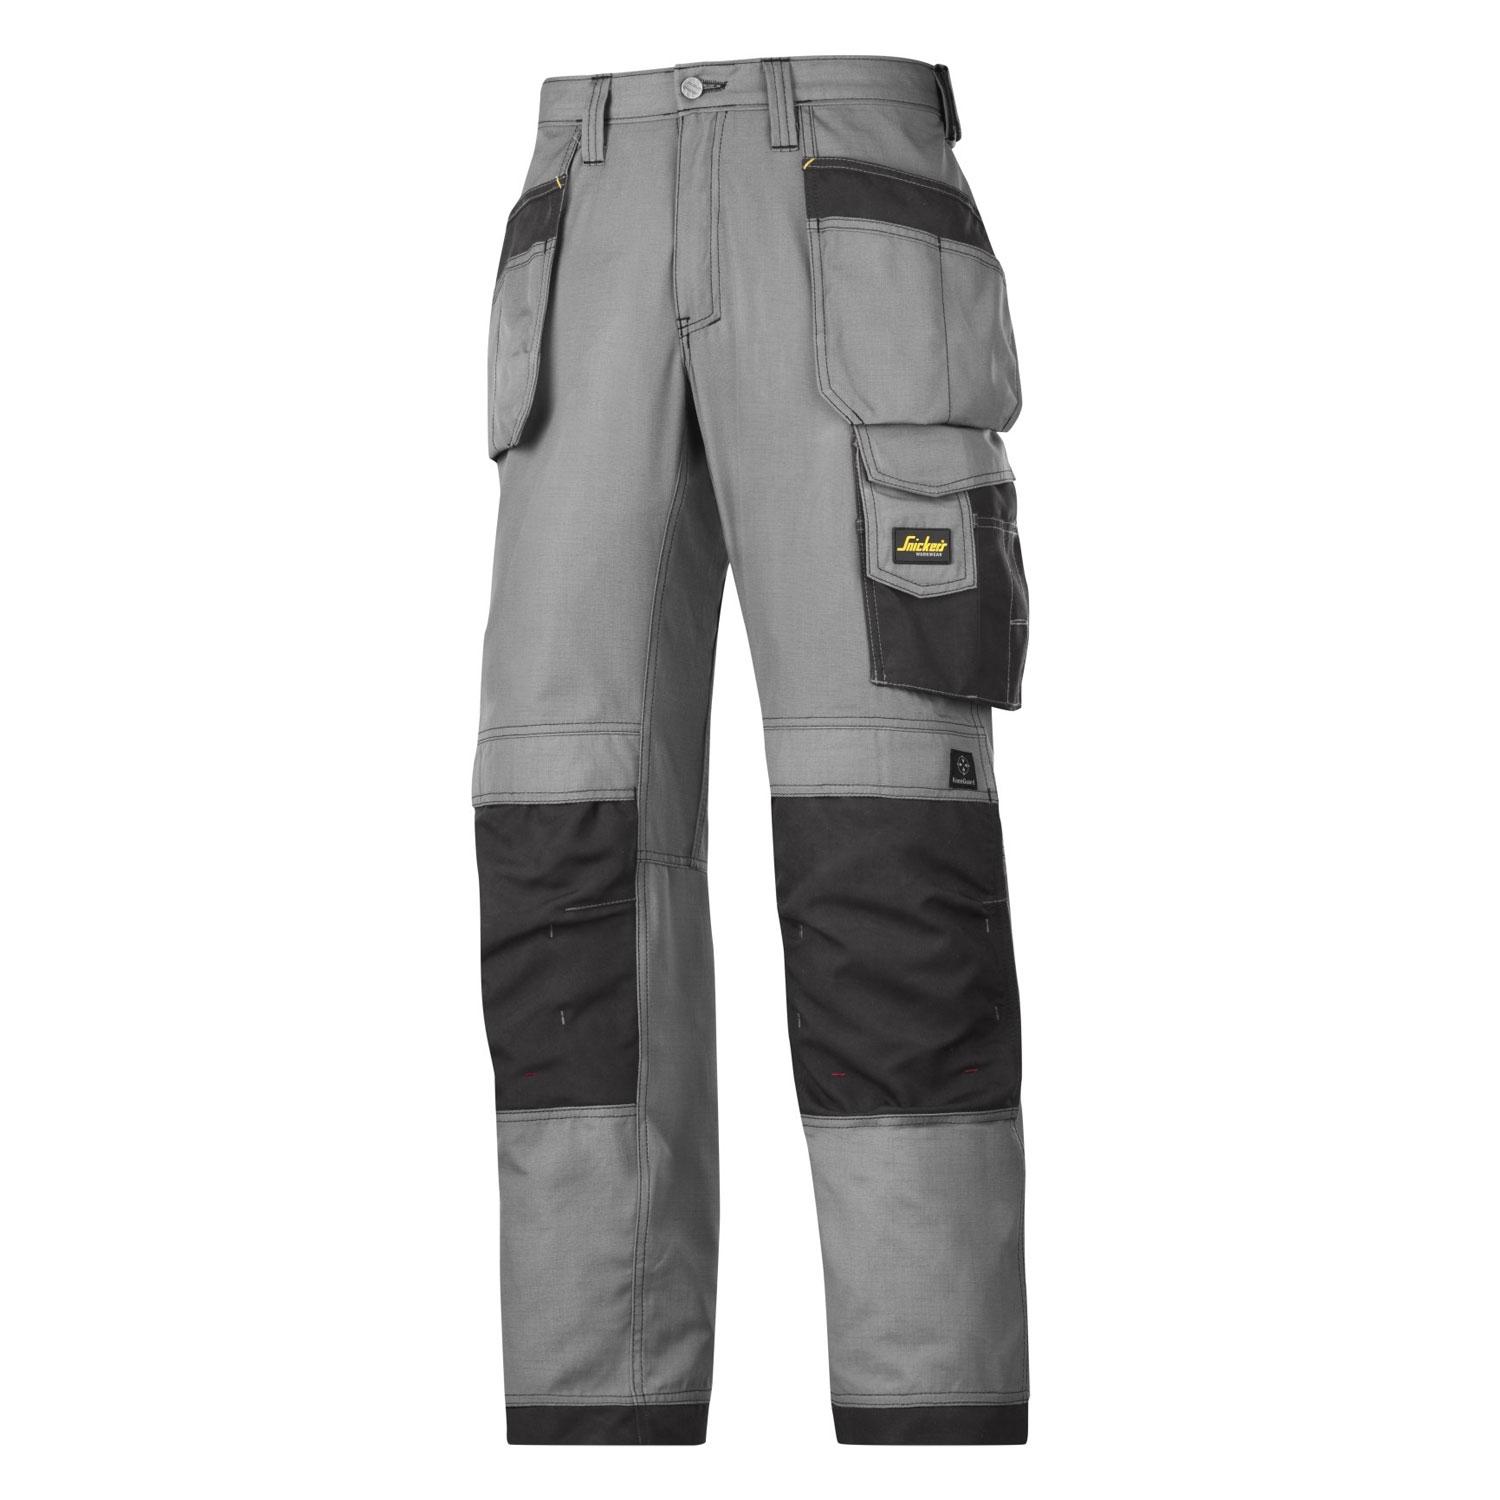 Buy Snickers 3212 Craftsman Duratwill Pocket Trouser Grey/Black Size 80 ...